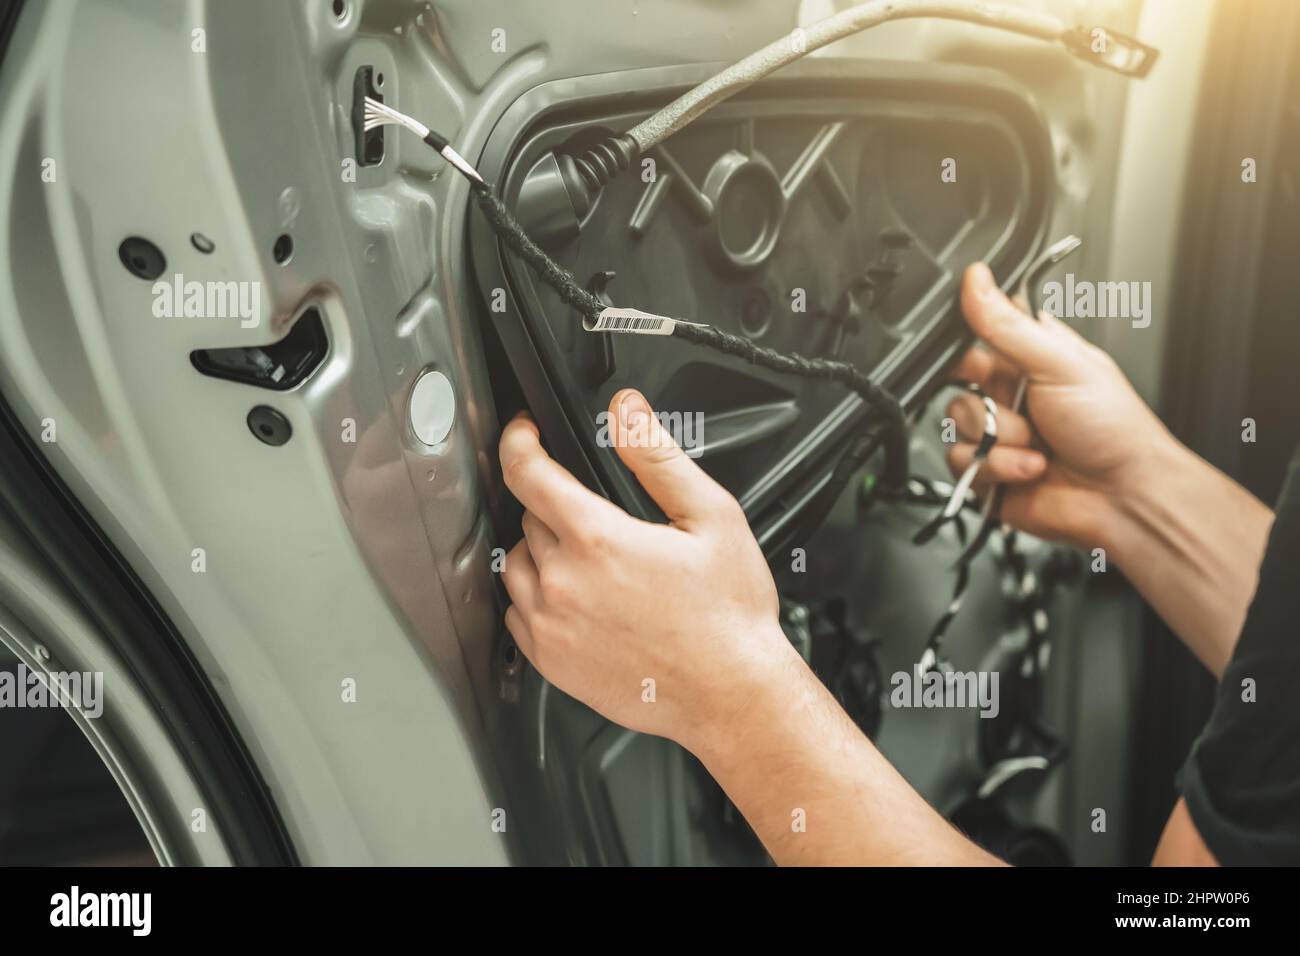 Auto service worker disassembles car door for repair close up. Stock Photo